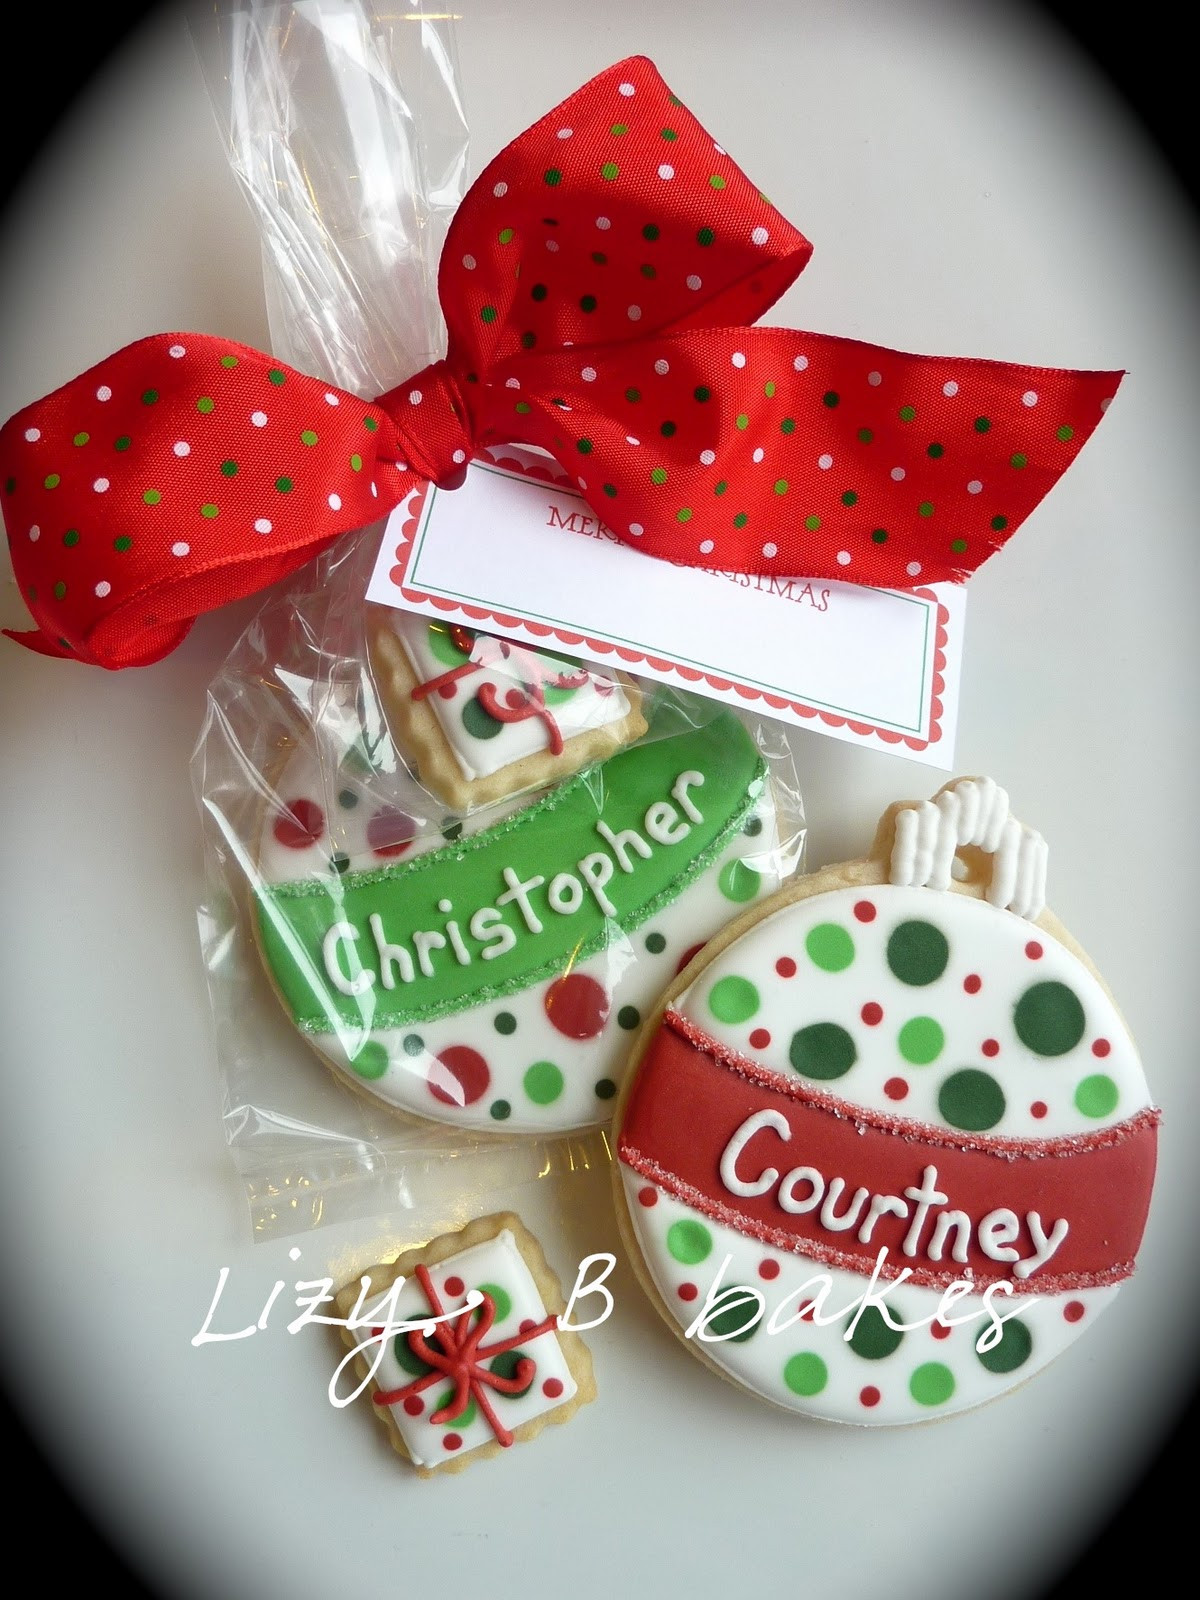 Christmas Cookie Gift Ideas
 Lizy B Personalized Christmas Cookies